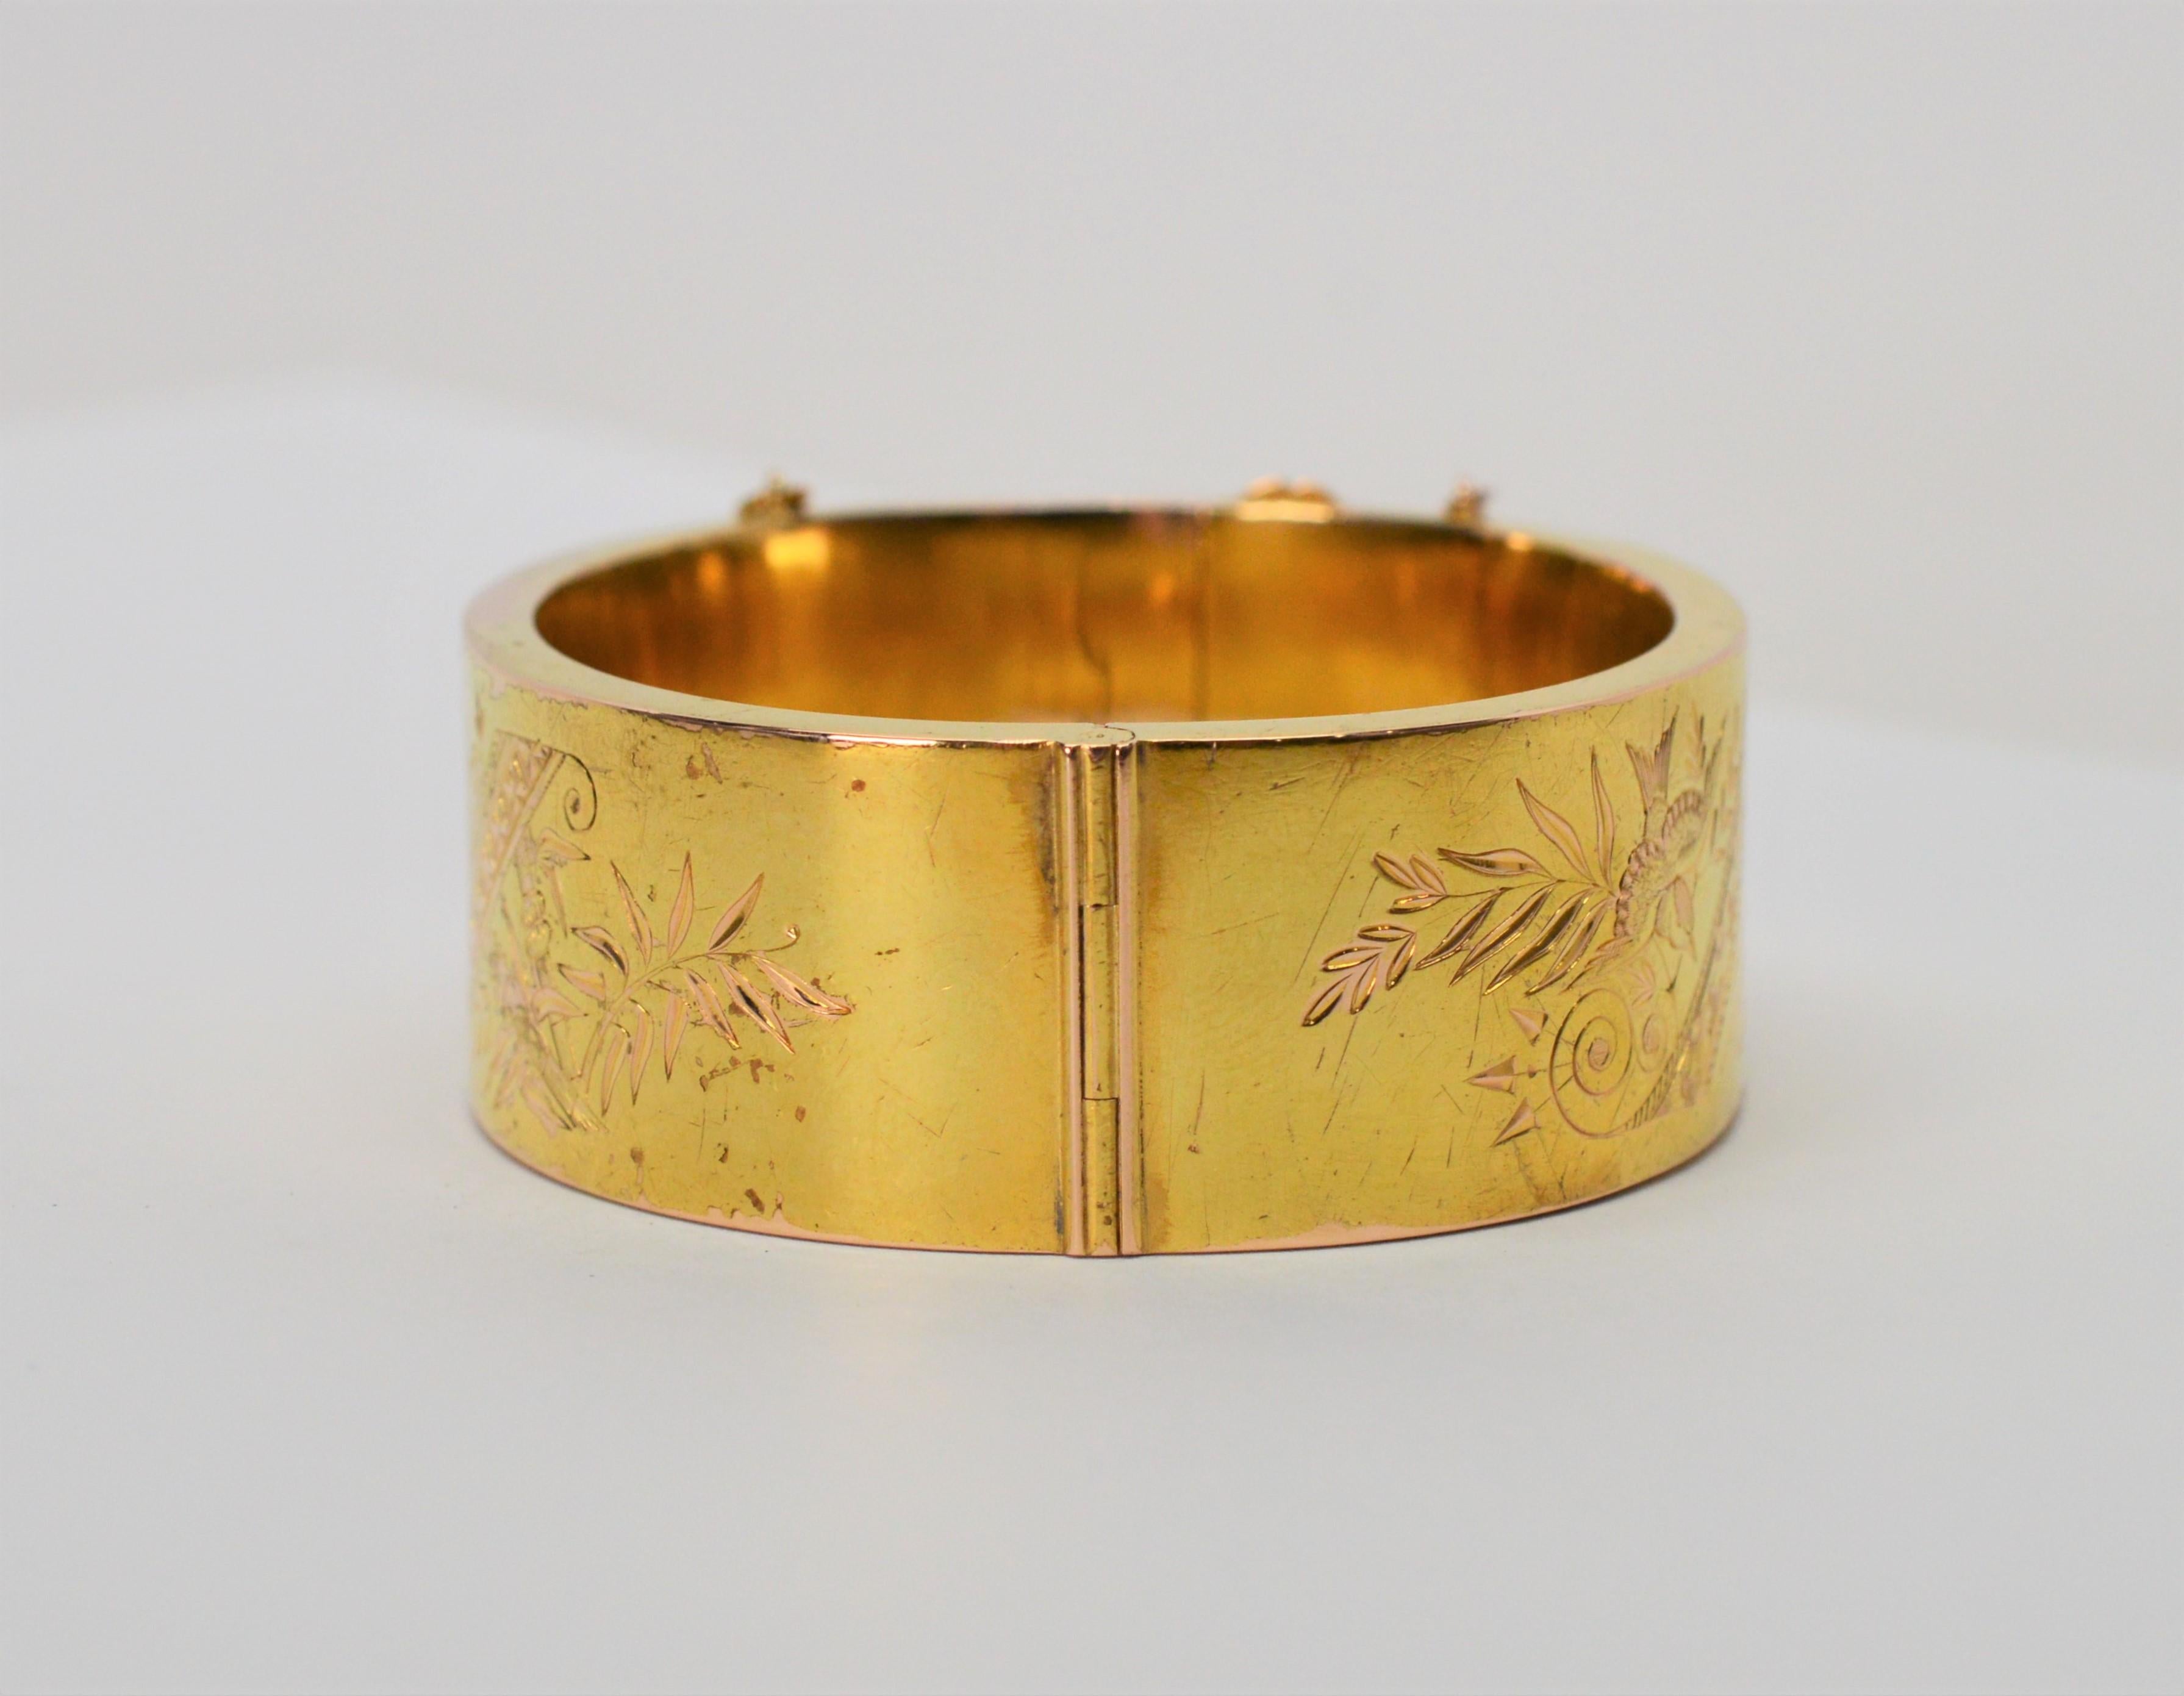 Elegant, with decorative engraving on both front and back, this antique piece is in fourteen carat (14K) polished yellow gold. For smaller wrists, measuring  2-1/8 x 1-3/4 inches or a 6 inch circumference, the bracelet is hinged for easier on/off